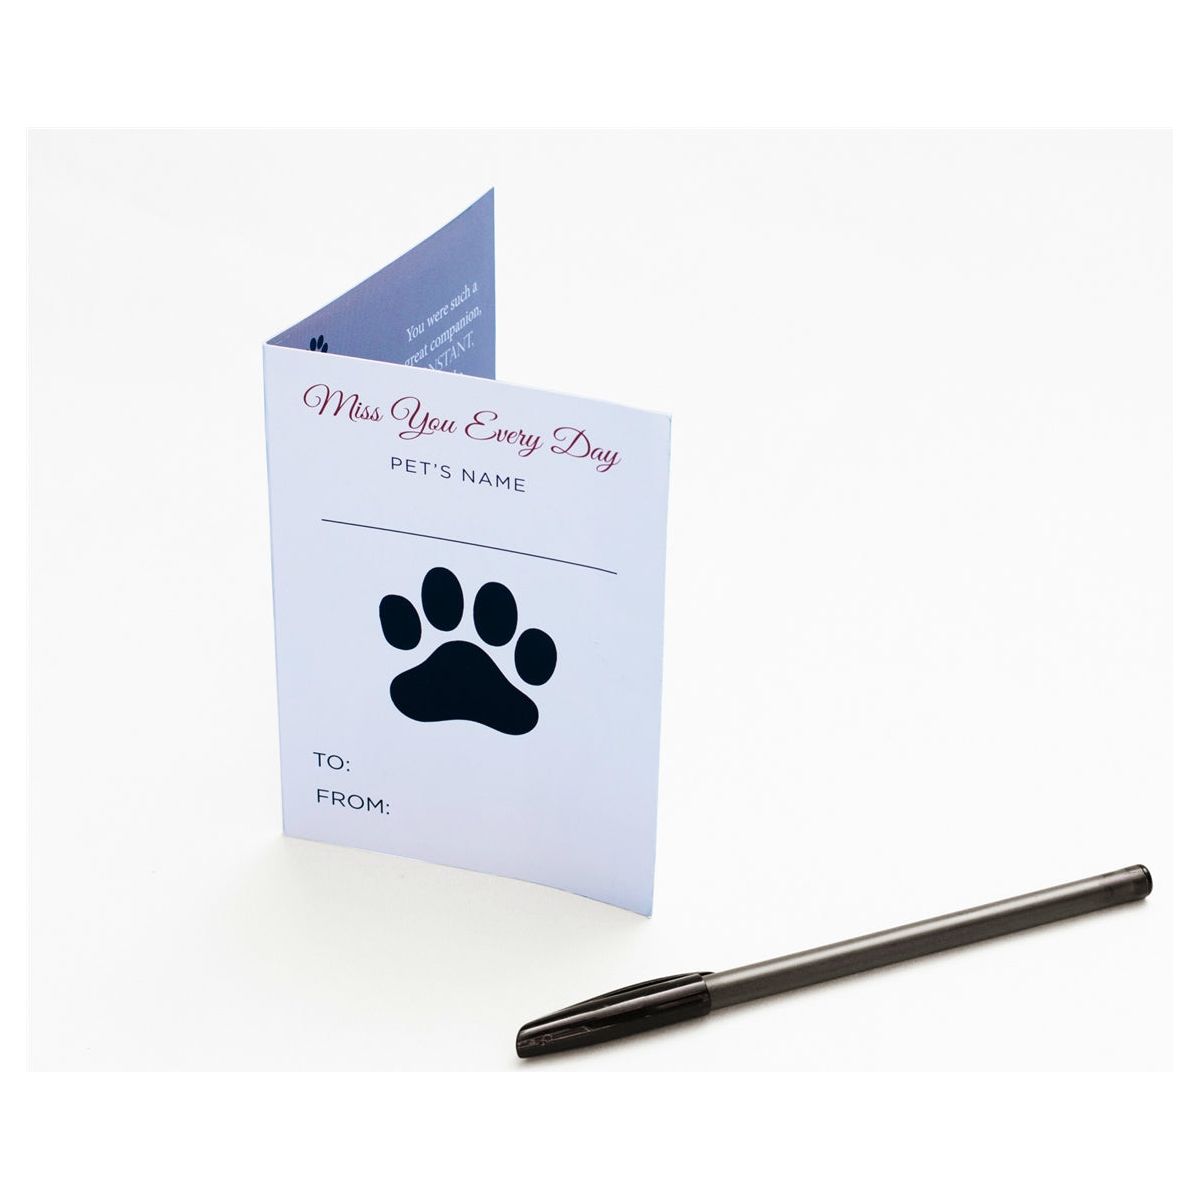 The Pawprints blanket includes a gift card in which the giver can include a personal message.